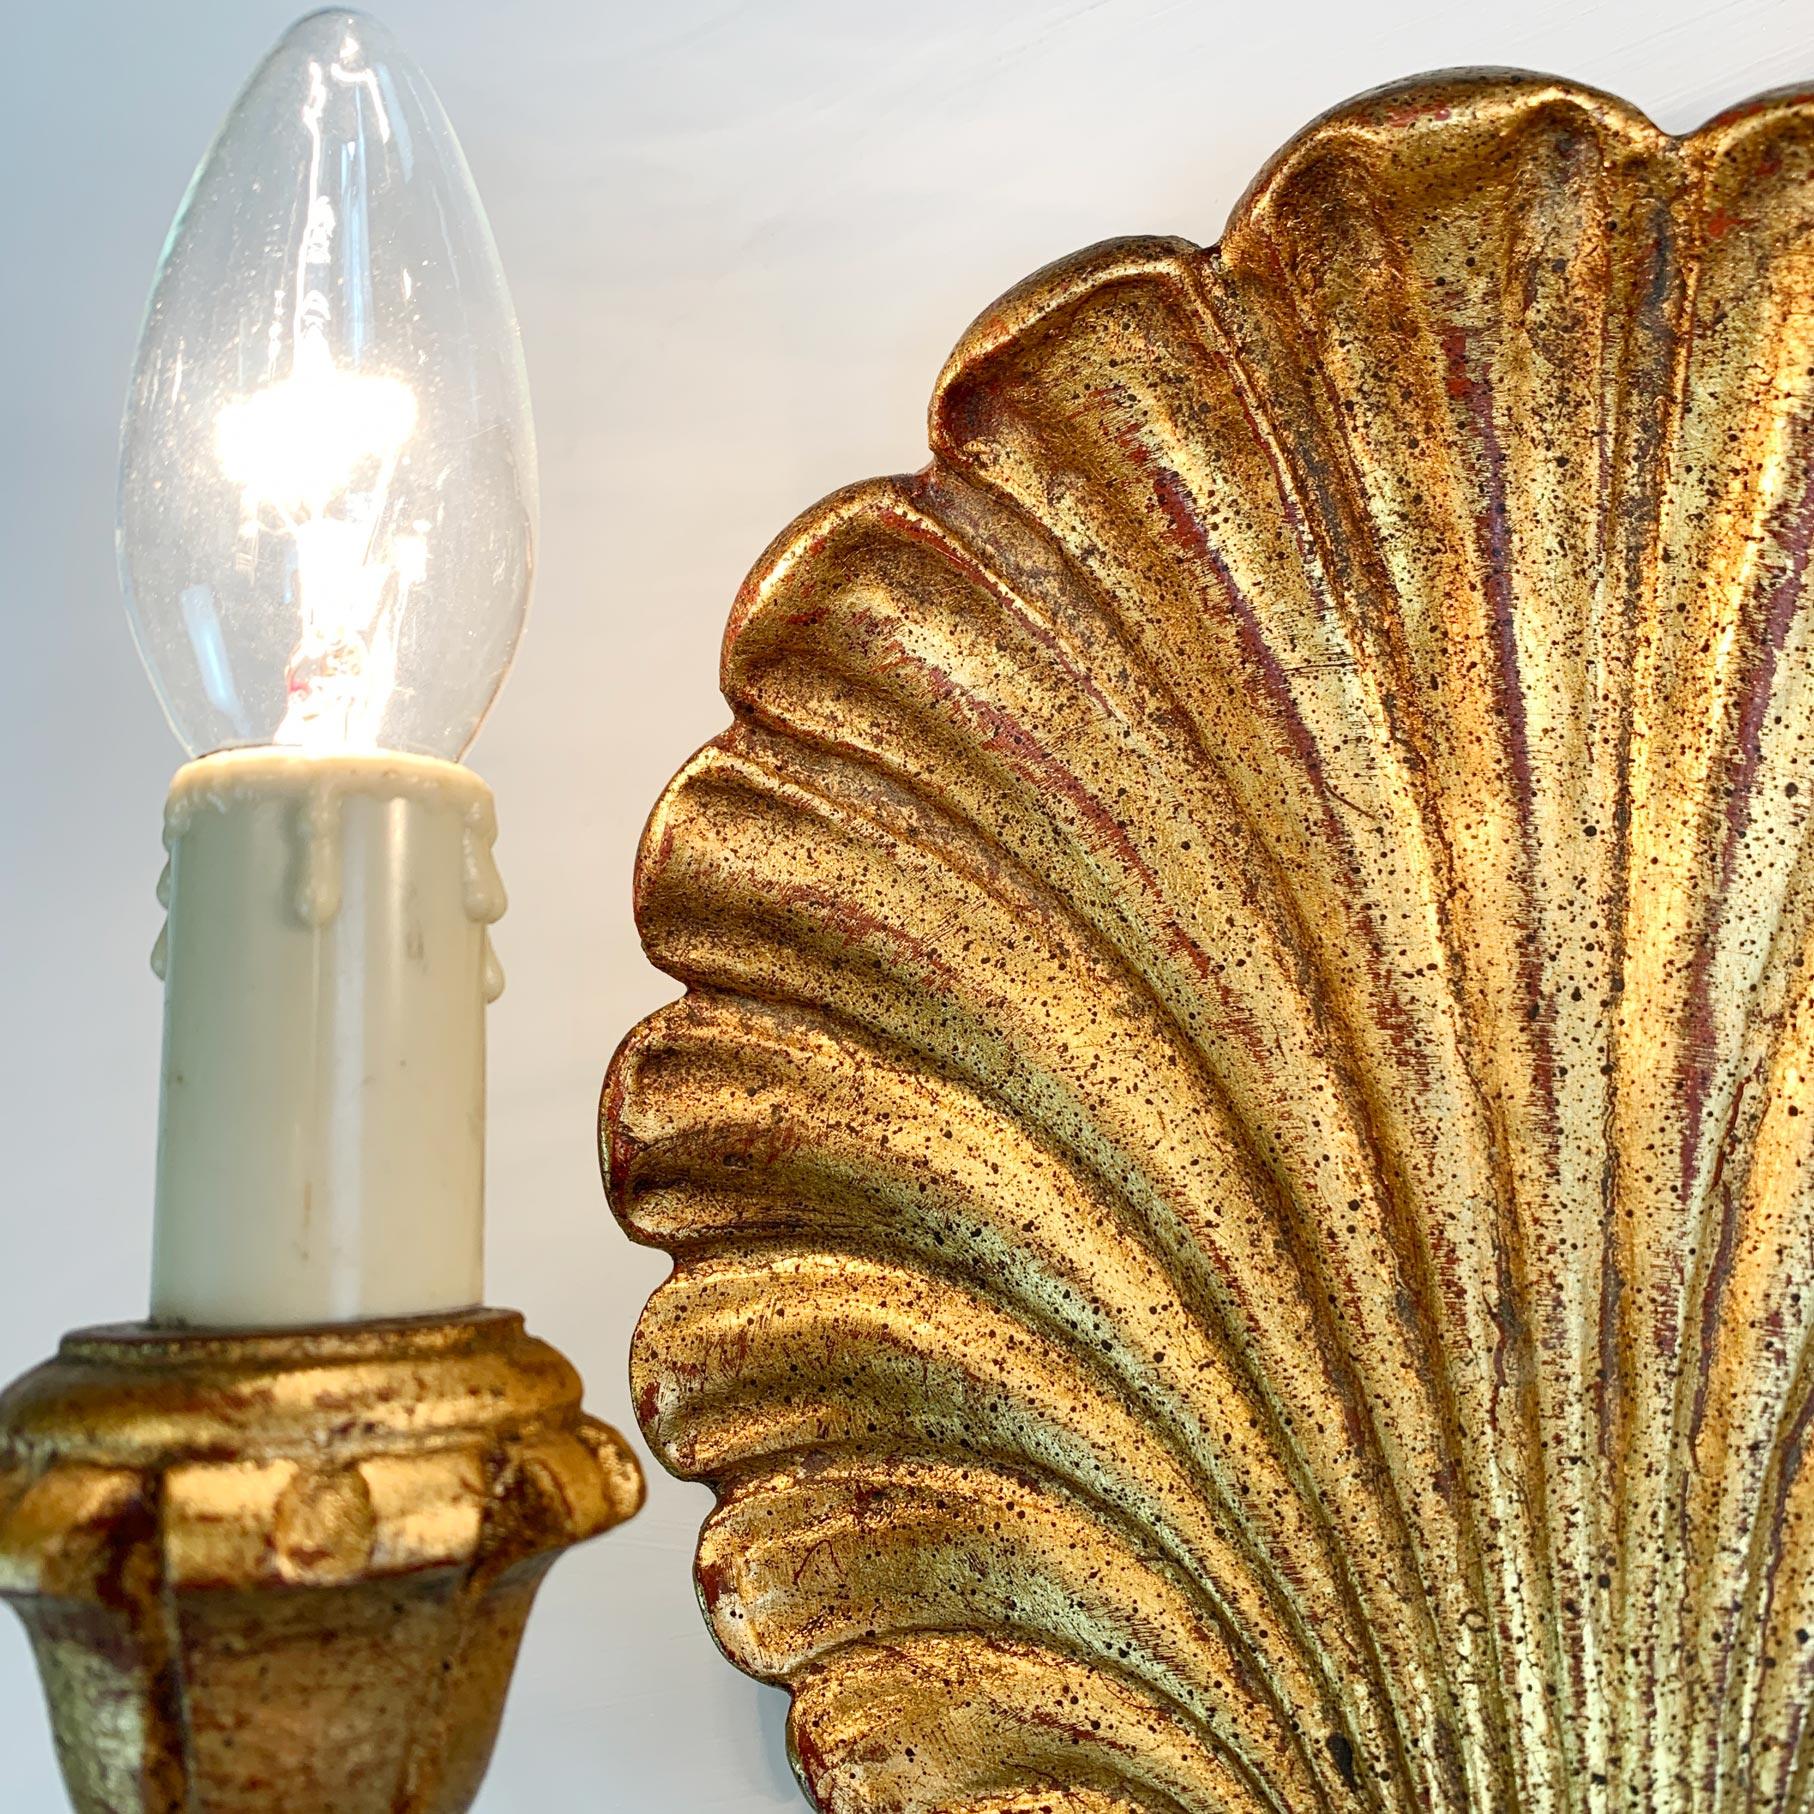 Palladio Italian shell wall lights, Italian, 1960's.
A single gilt wood clam shell wall sconce.

Metal arms with decorative metal acanthus leaf shaped details.

Decorative cups, each holding a single lamp holder, e14 bulbs.

Measures: 25cm